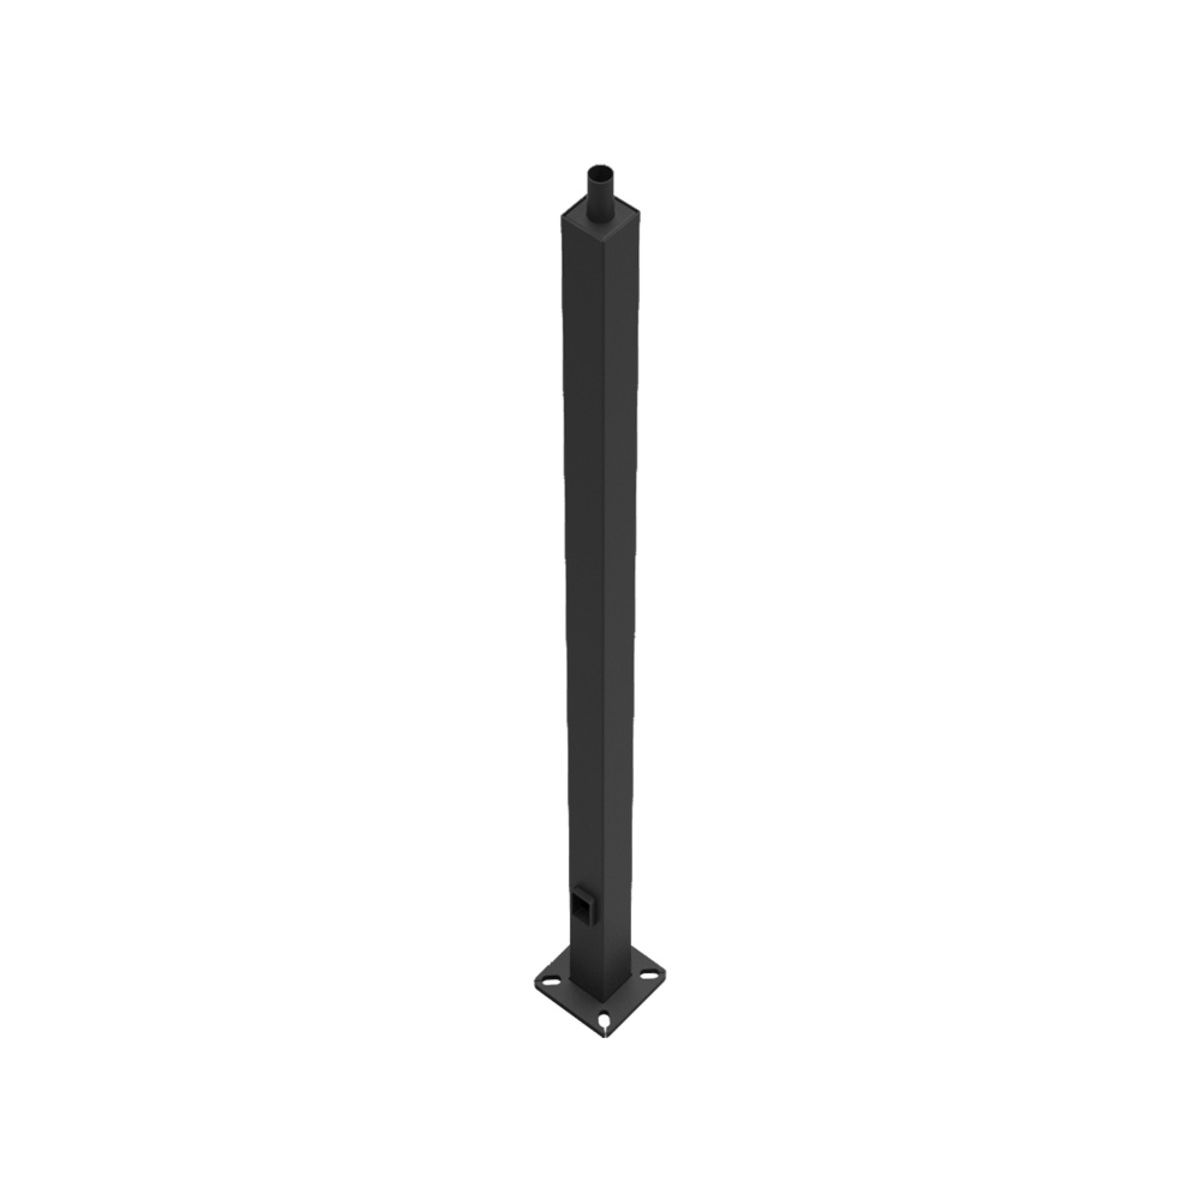 15 Ft Square Steel Tenon Top Pole 4 In. Shaft 11 Gauge